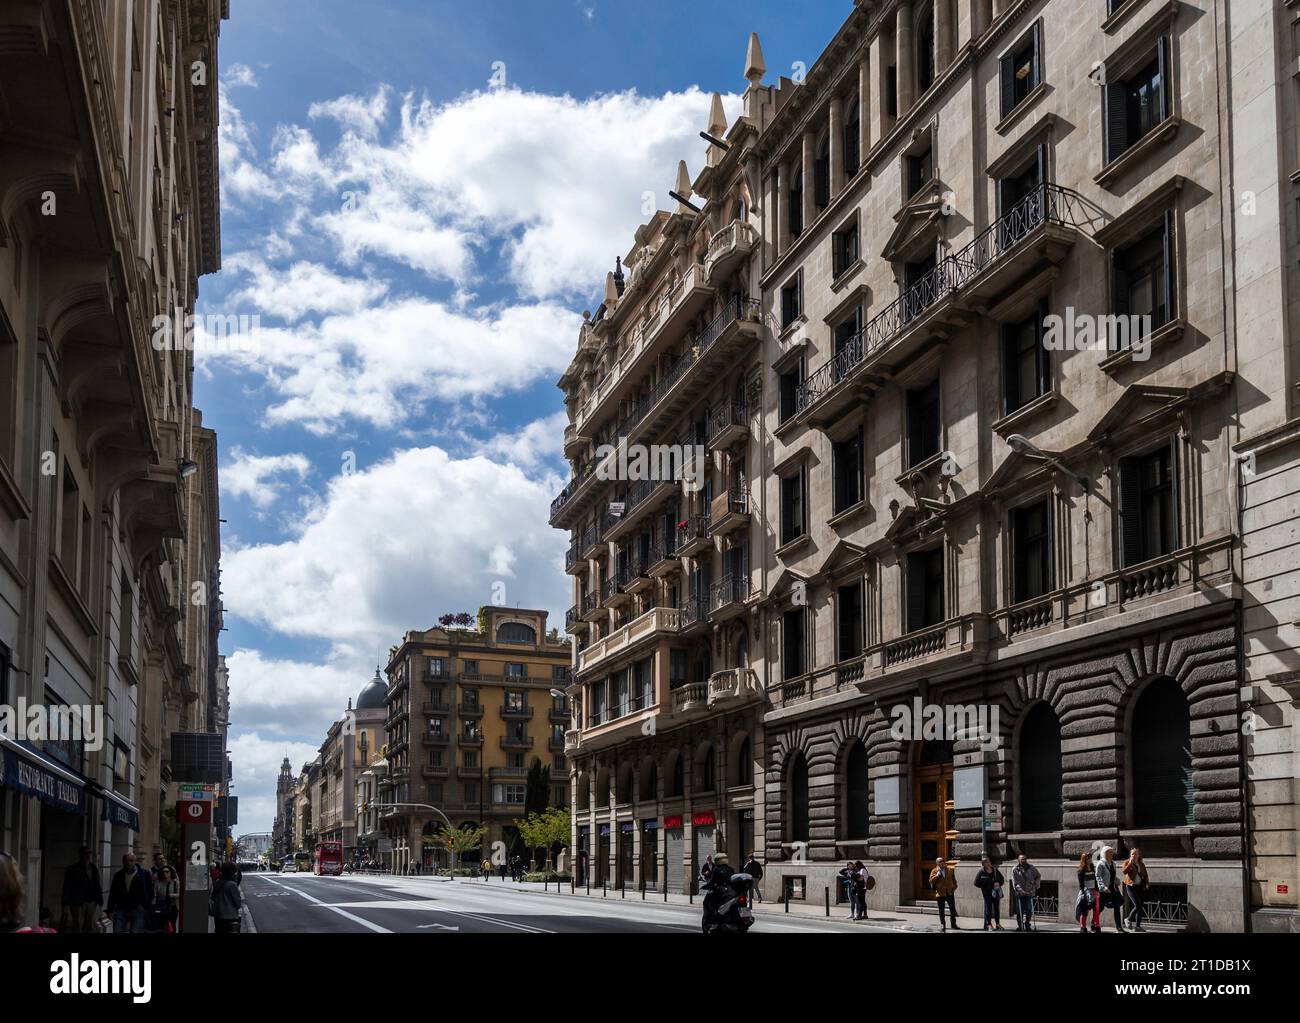 Barcelona, Catalonia, Spain May 01 2017 - Looking down Vía Layetana showing the different styles of buildings with Casal Del Metge on the right side Stock Photo